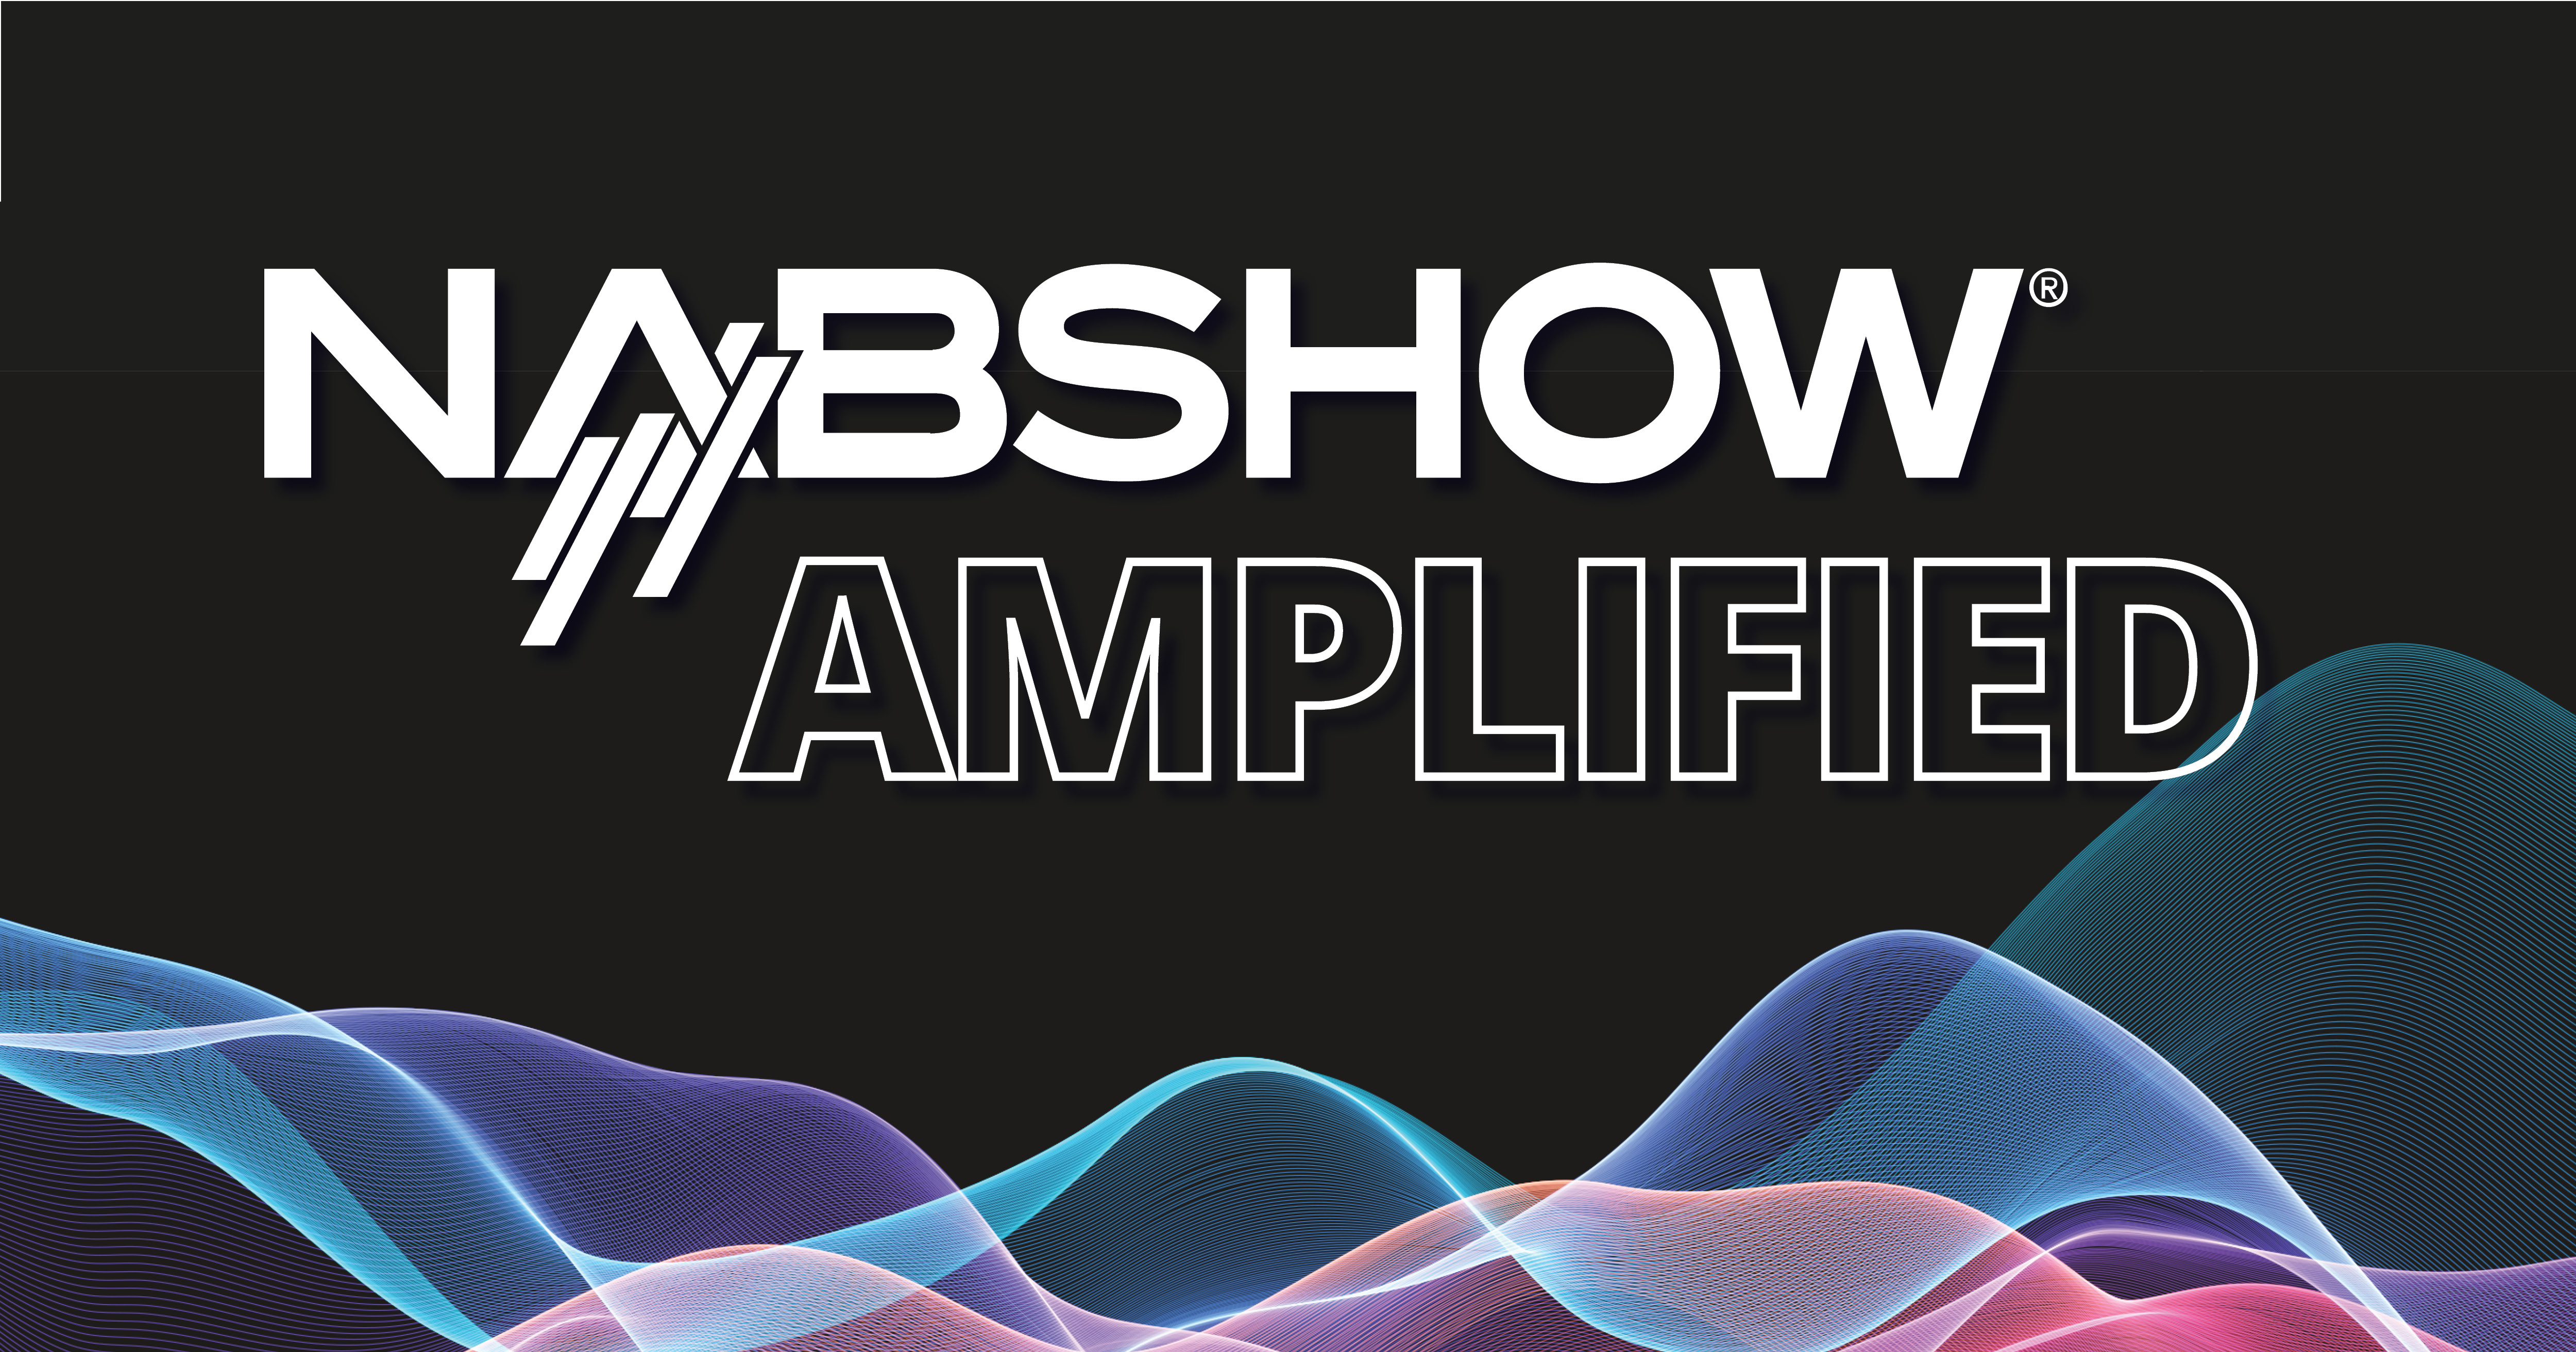 NAB Show Amplified